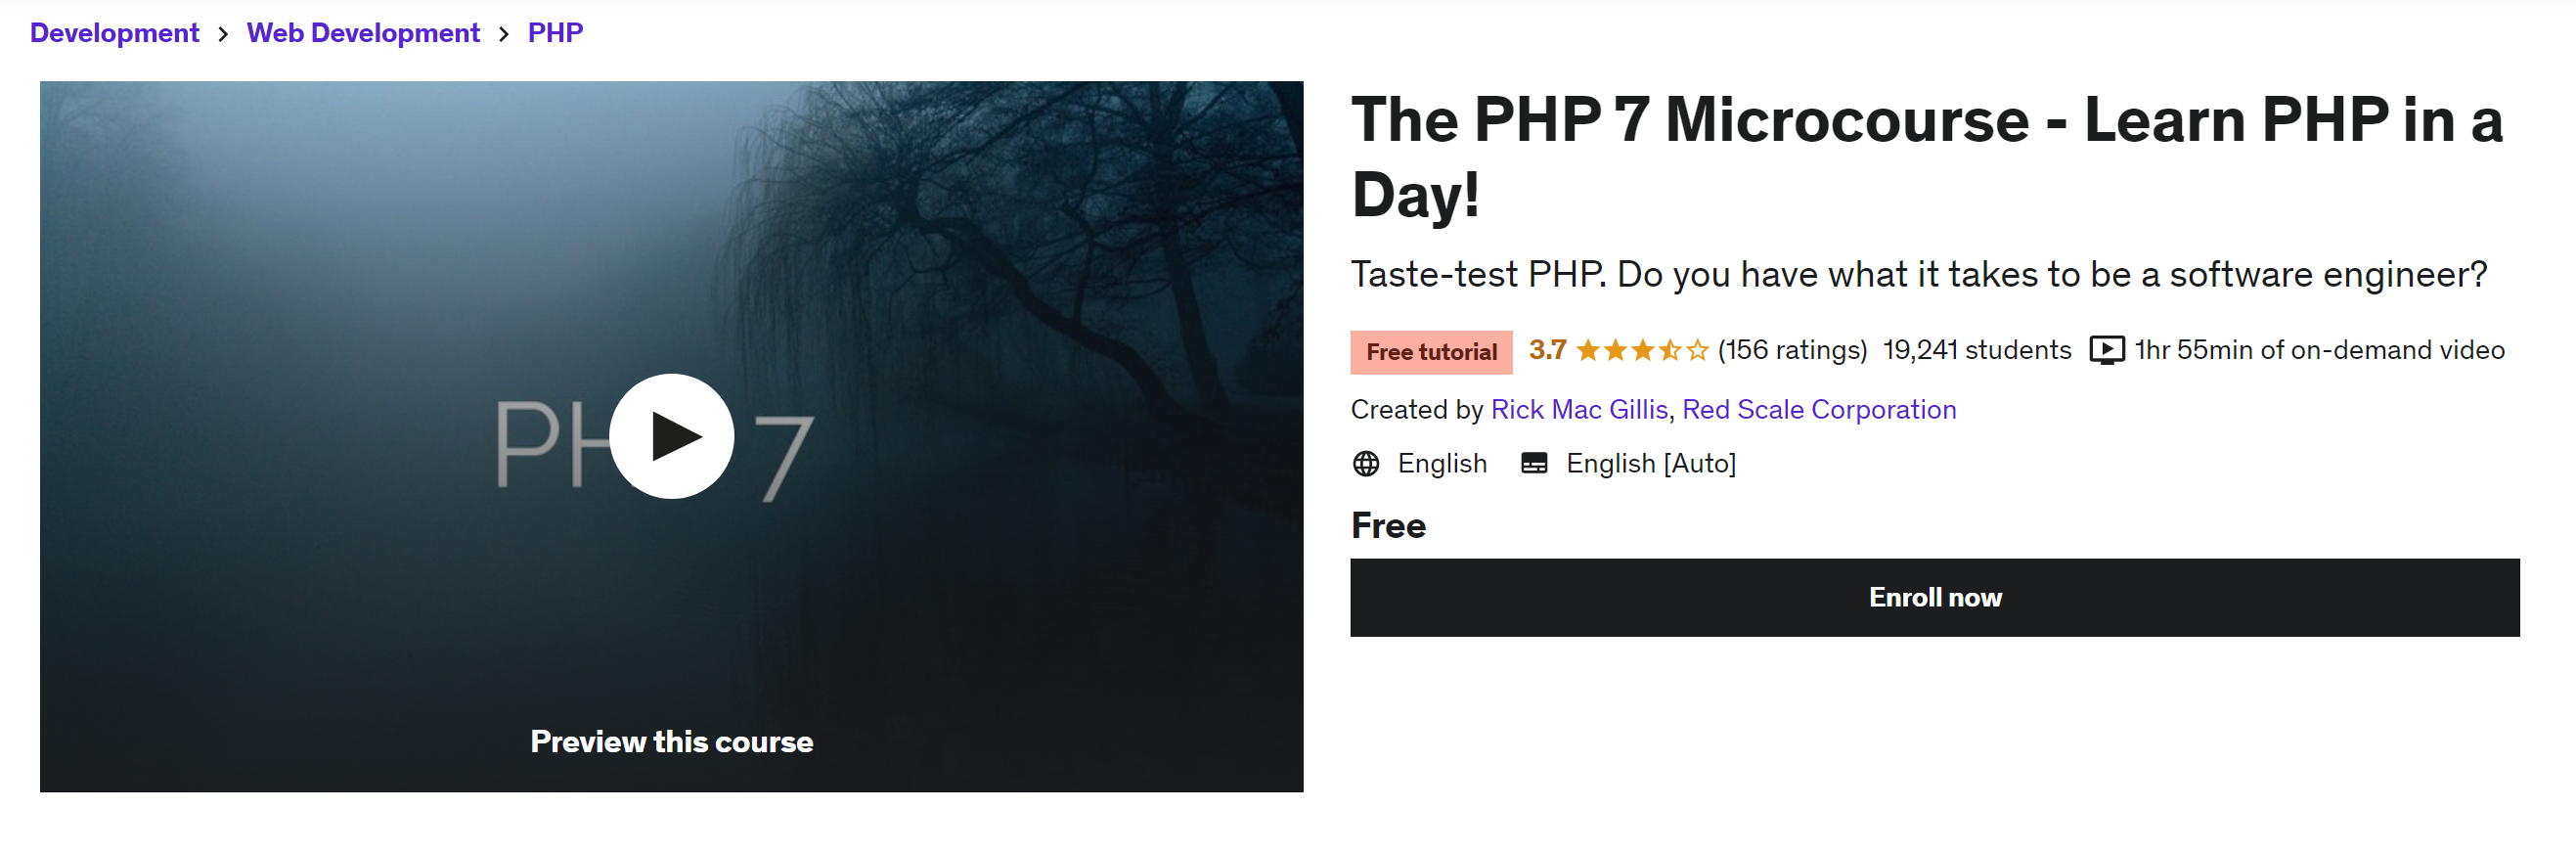 PHP 7 Micro Course - Learn PHP in a Day